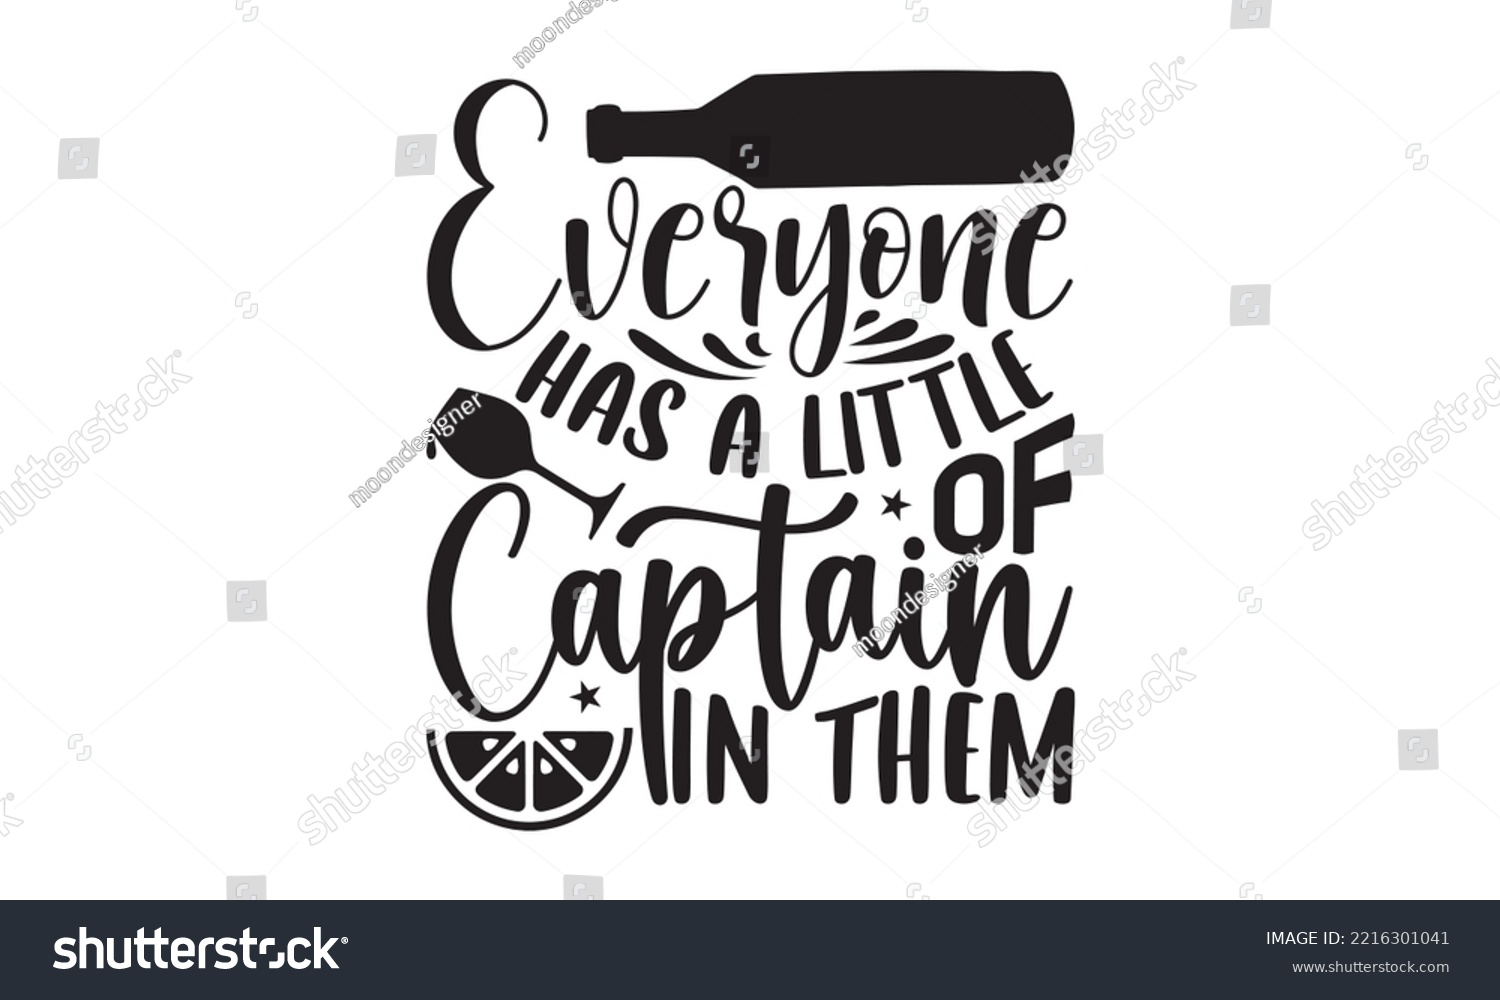 SVG of Everyone has a little of captain in them - Alcohol SVG T Shirt design, Girl Beer Design, Prost, Pretzels and Beer, Vector EPS Editable Files, Alcohol funny quotes, Oktoberfest Alcohol SVG design,  EPS svg